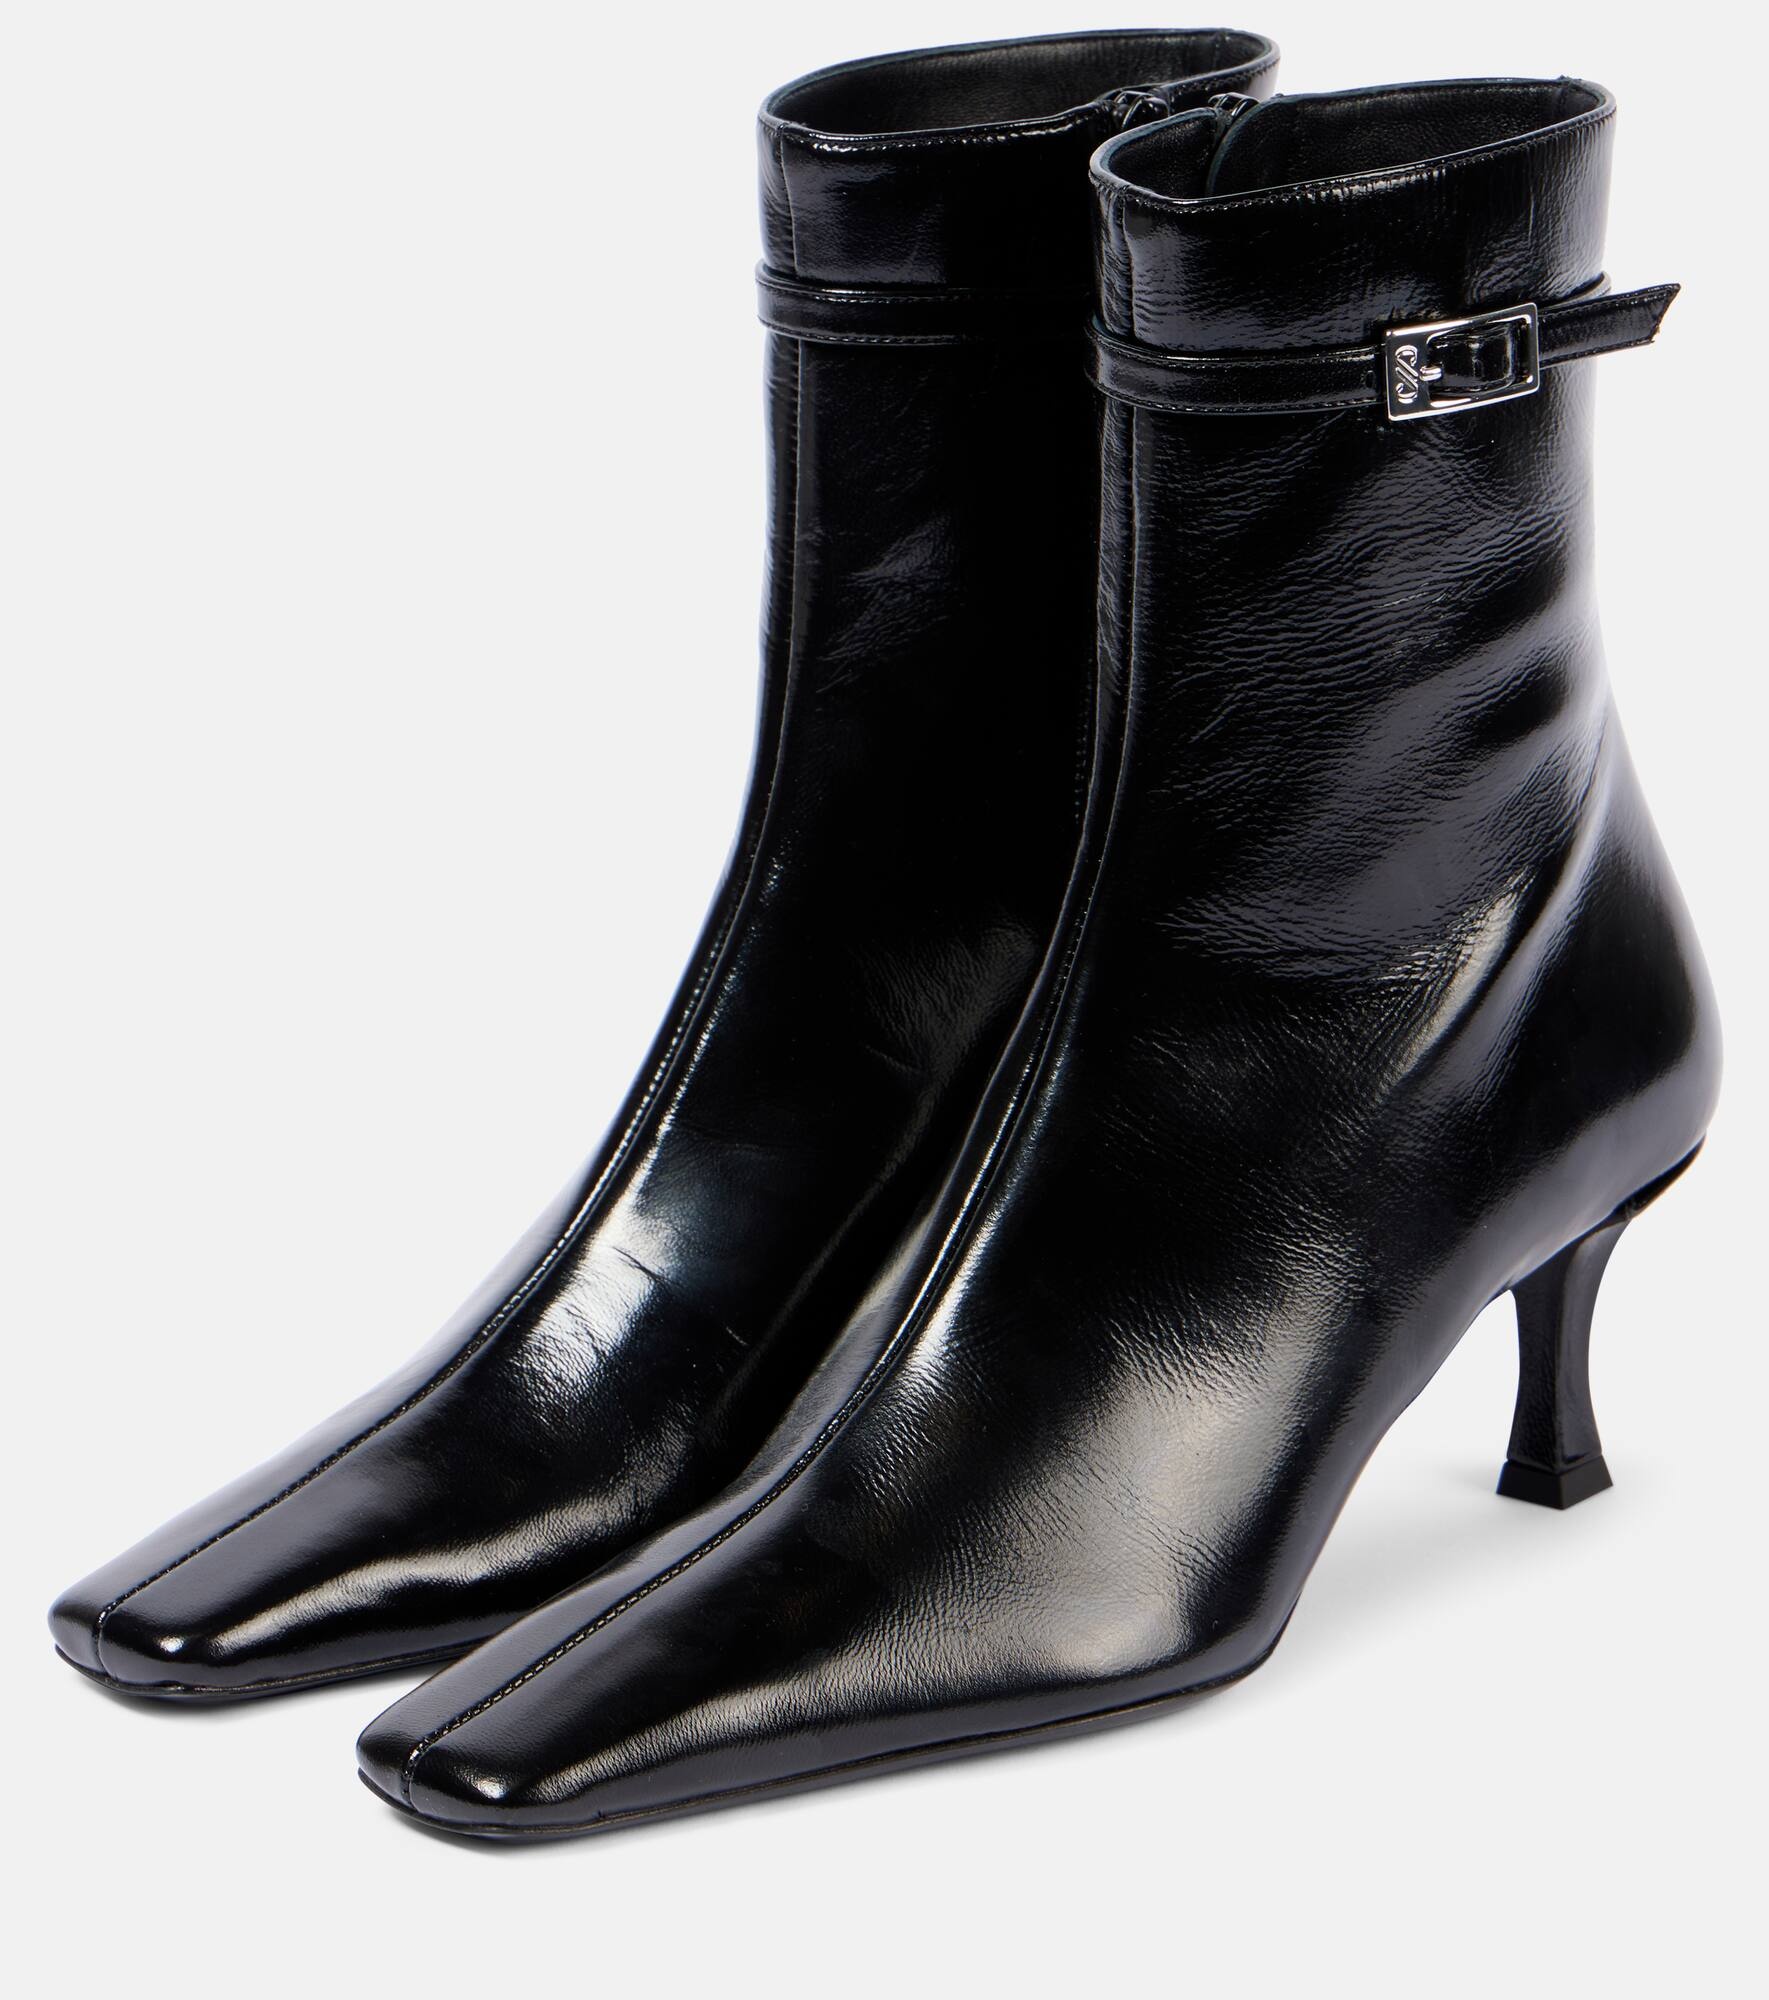 60 leather ankle boots - 5